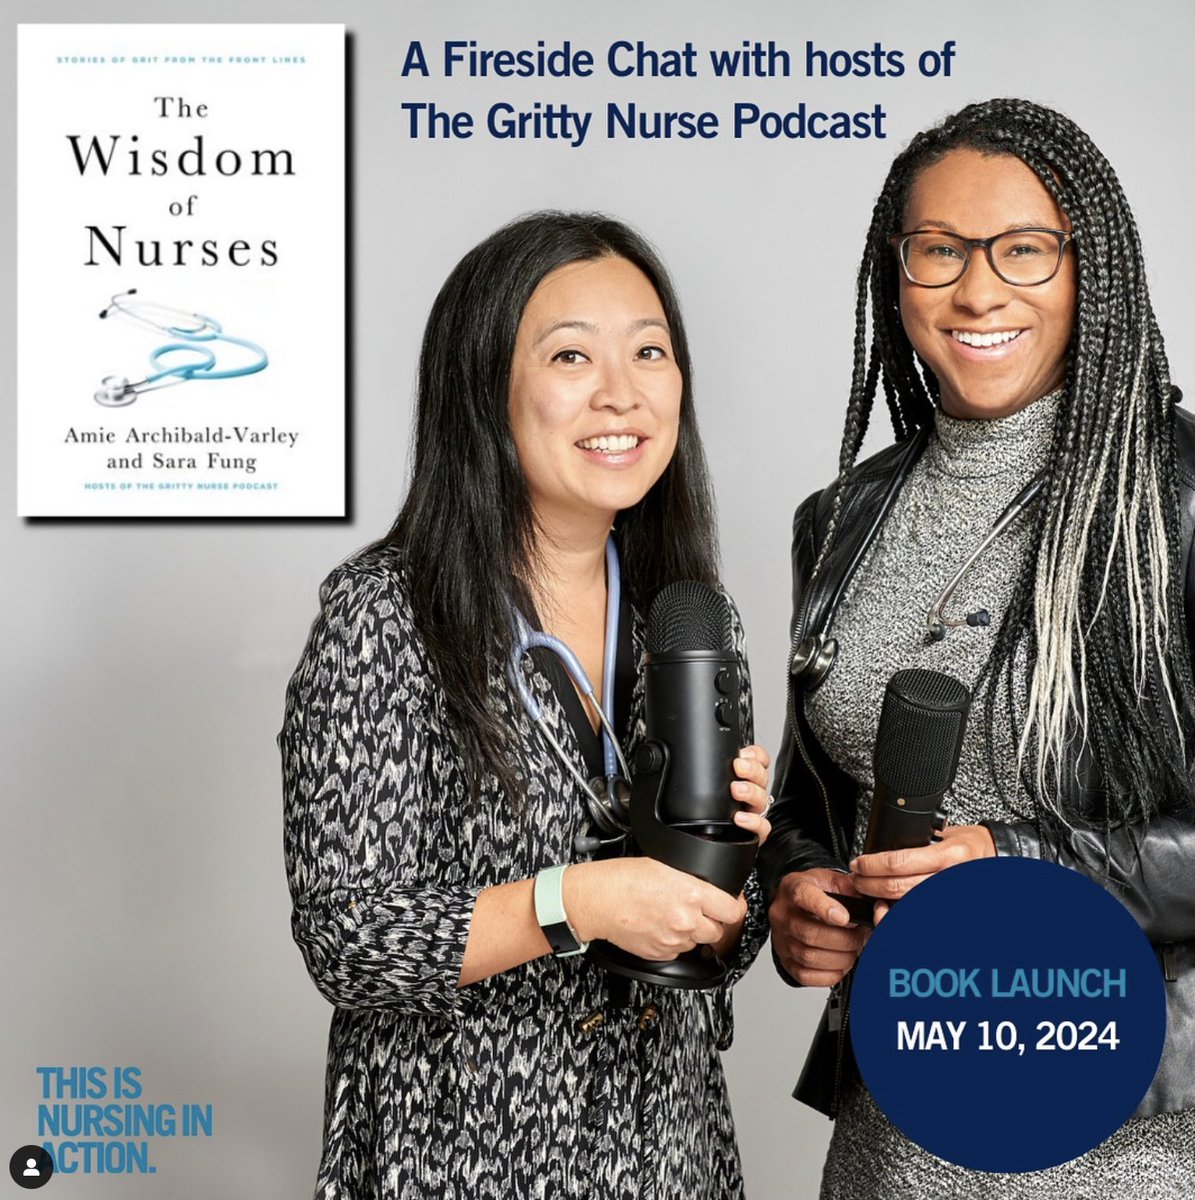 Wrapping up National Nursing Week with this awesome chat as alumni with @UofT @UofTNursing on my #1 National Best Selling Book, The Wisdom of Nurses! See you soon! @HarperCollinsCa @NSB_Speakers @GrittyNurse